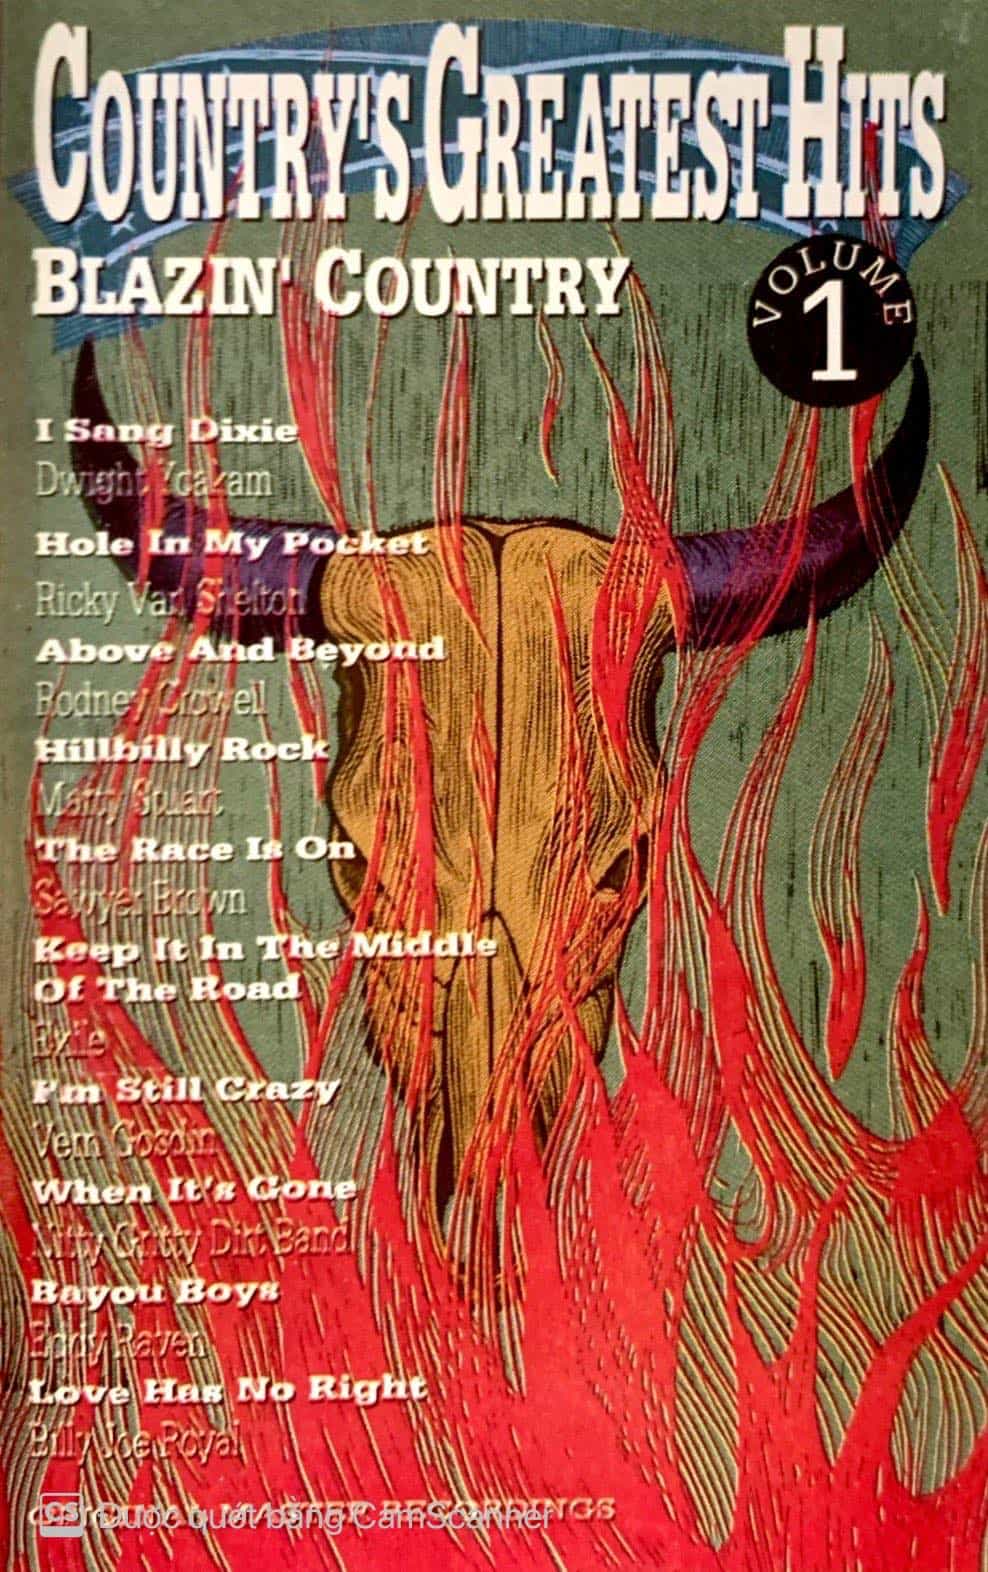 Various – Country's Greatest Hits Volume 1 Blazin' Country